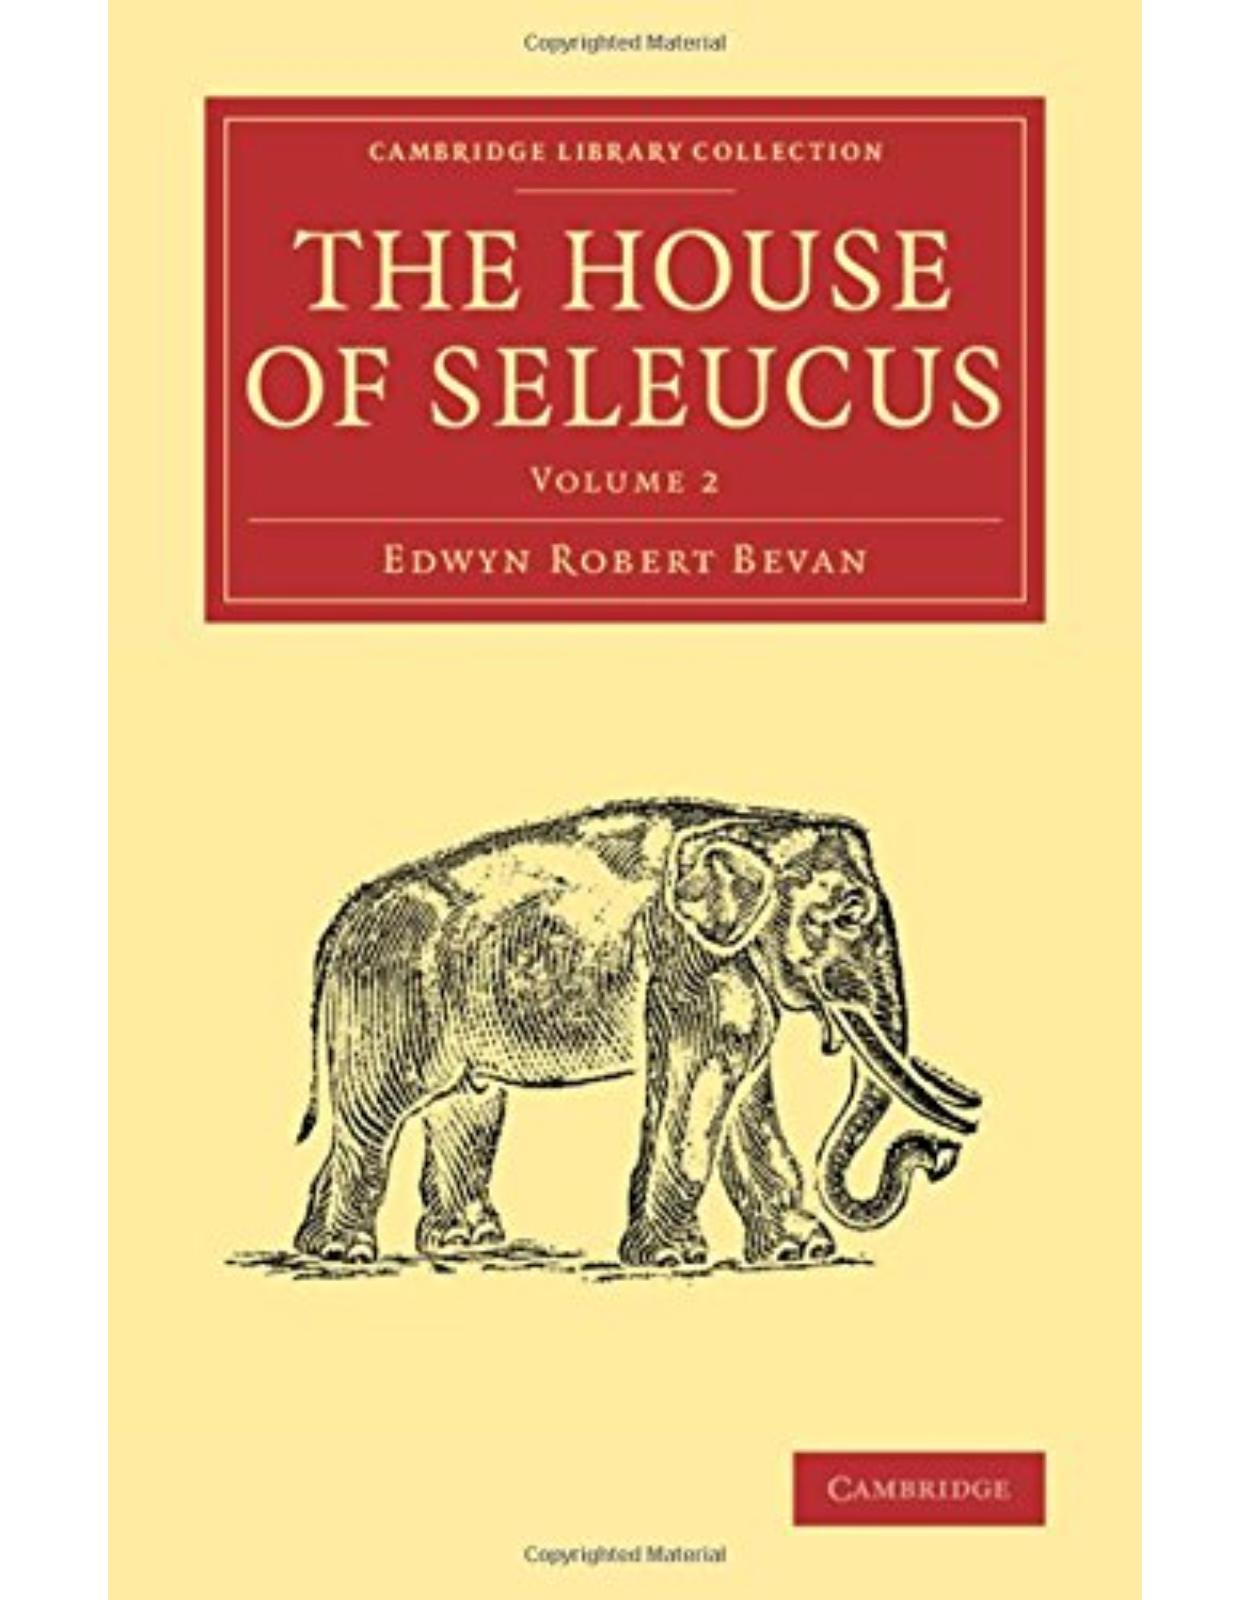 The House of Seleucus: Volume 2 (Cambridge Library Collection - Classics)